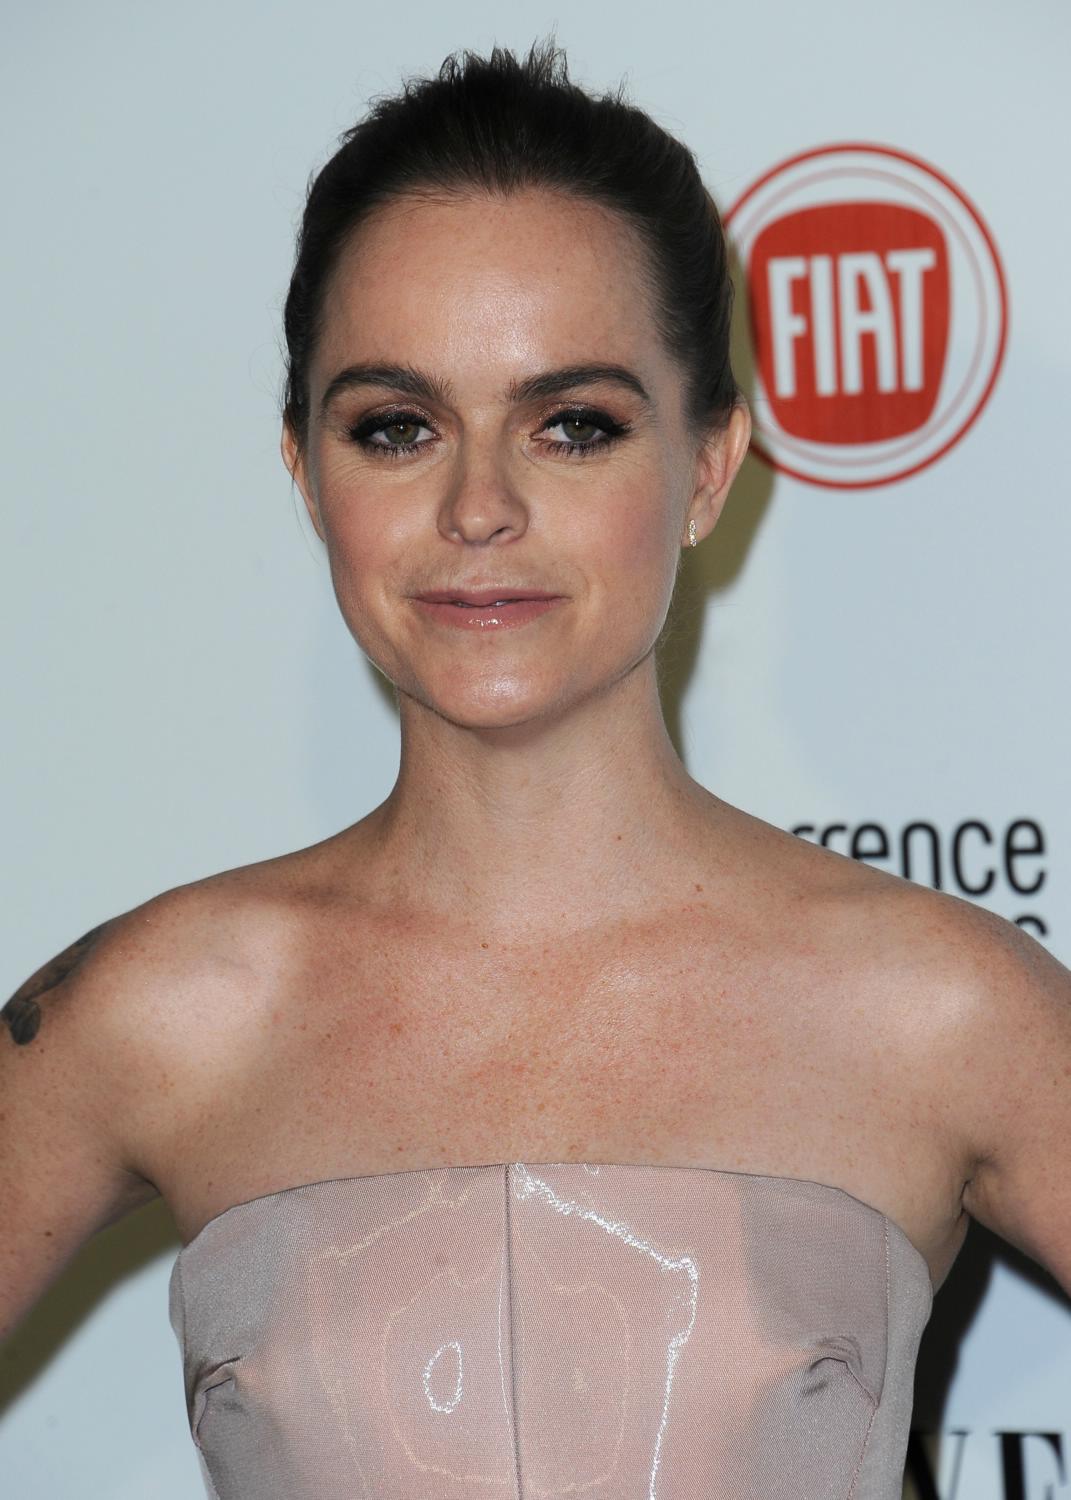 Taryn Manning ate Vanity Fair and Fiat Young Hollywood event